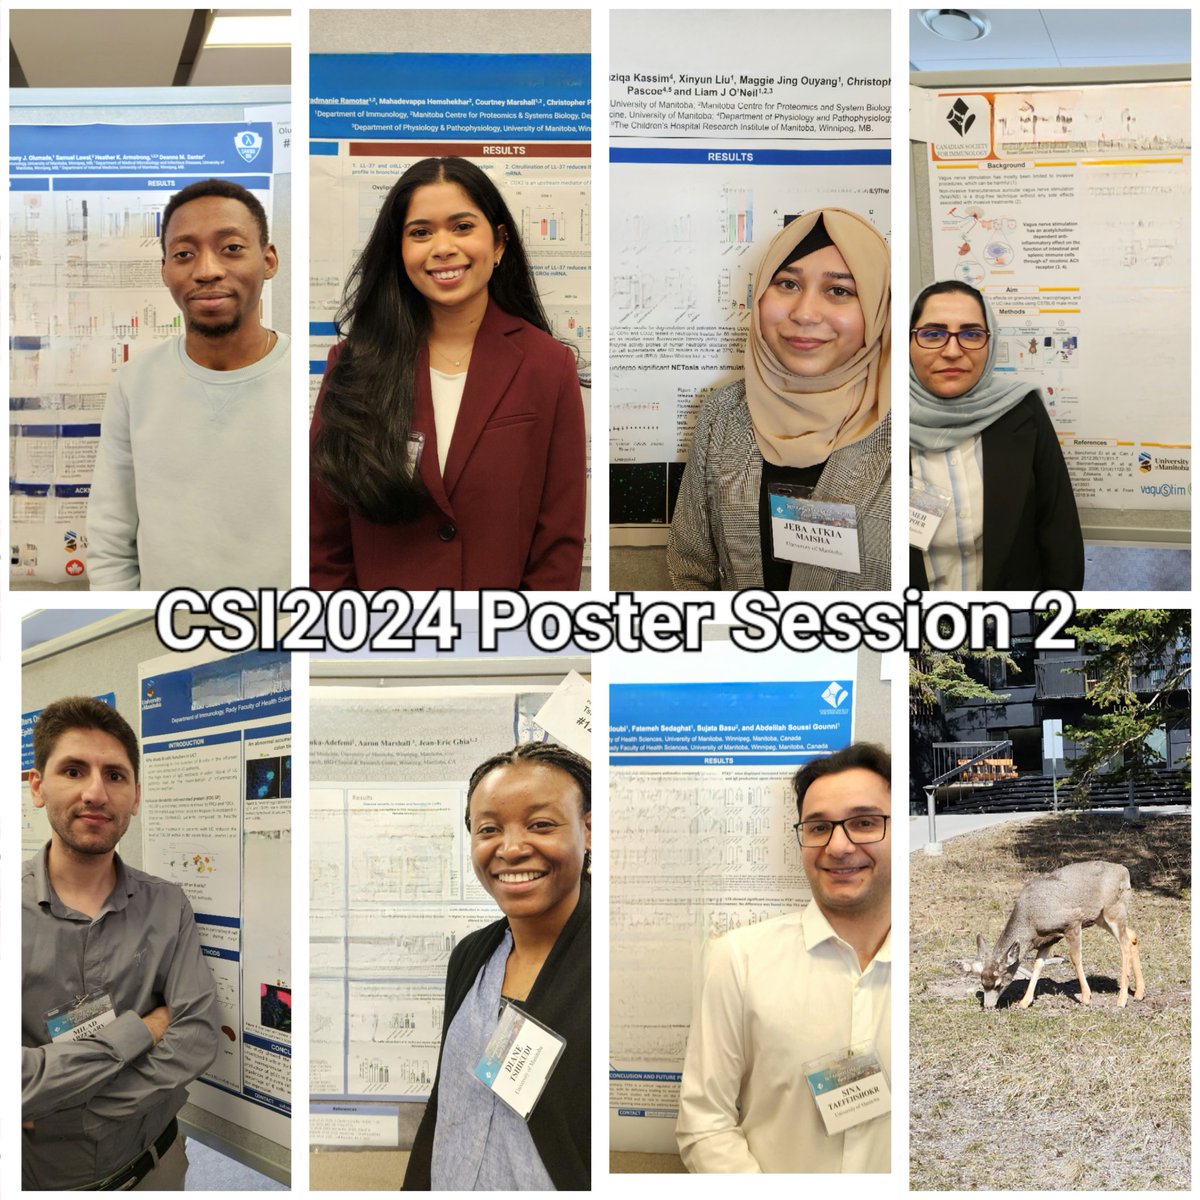 And #CSI2024 poster session #2! Another 7 awesome #immunology posters from @um_immu grad students 👏🏻👏🏻
#asthma #LL37 #IFNL #gutbrainaxis #RA #colitis #Bcells